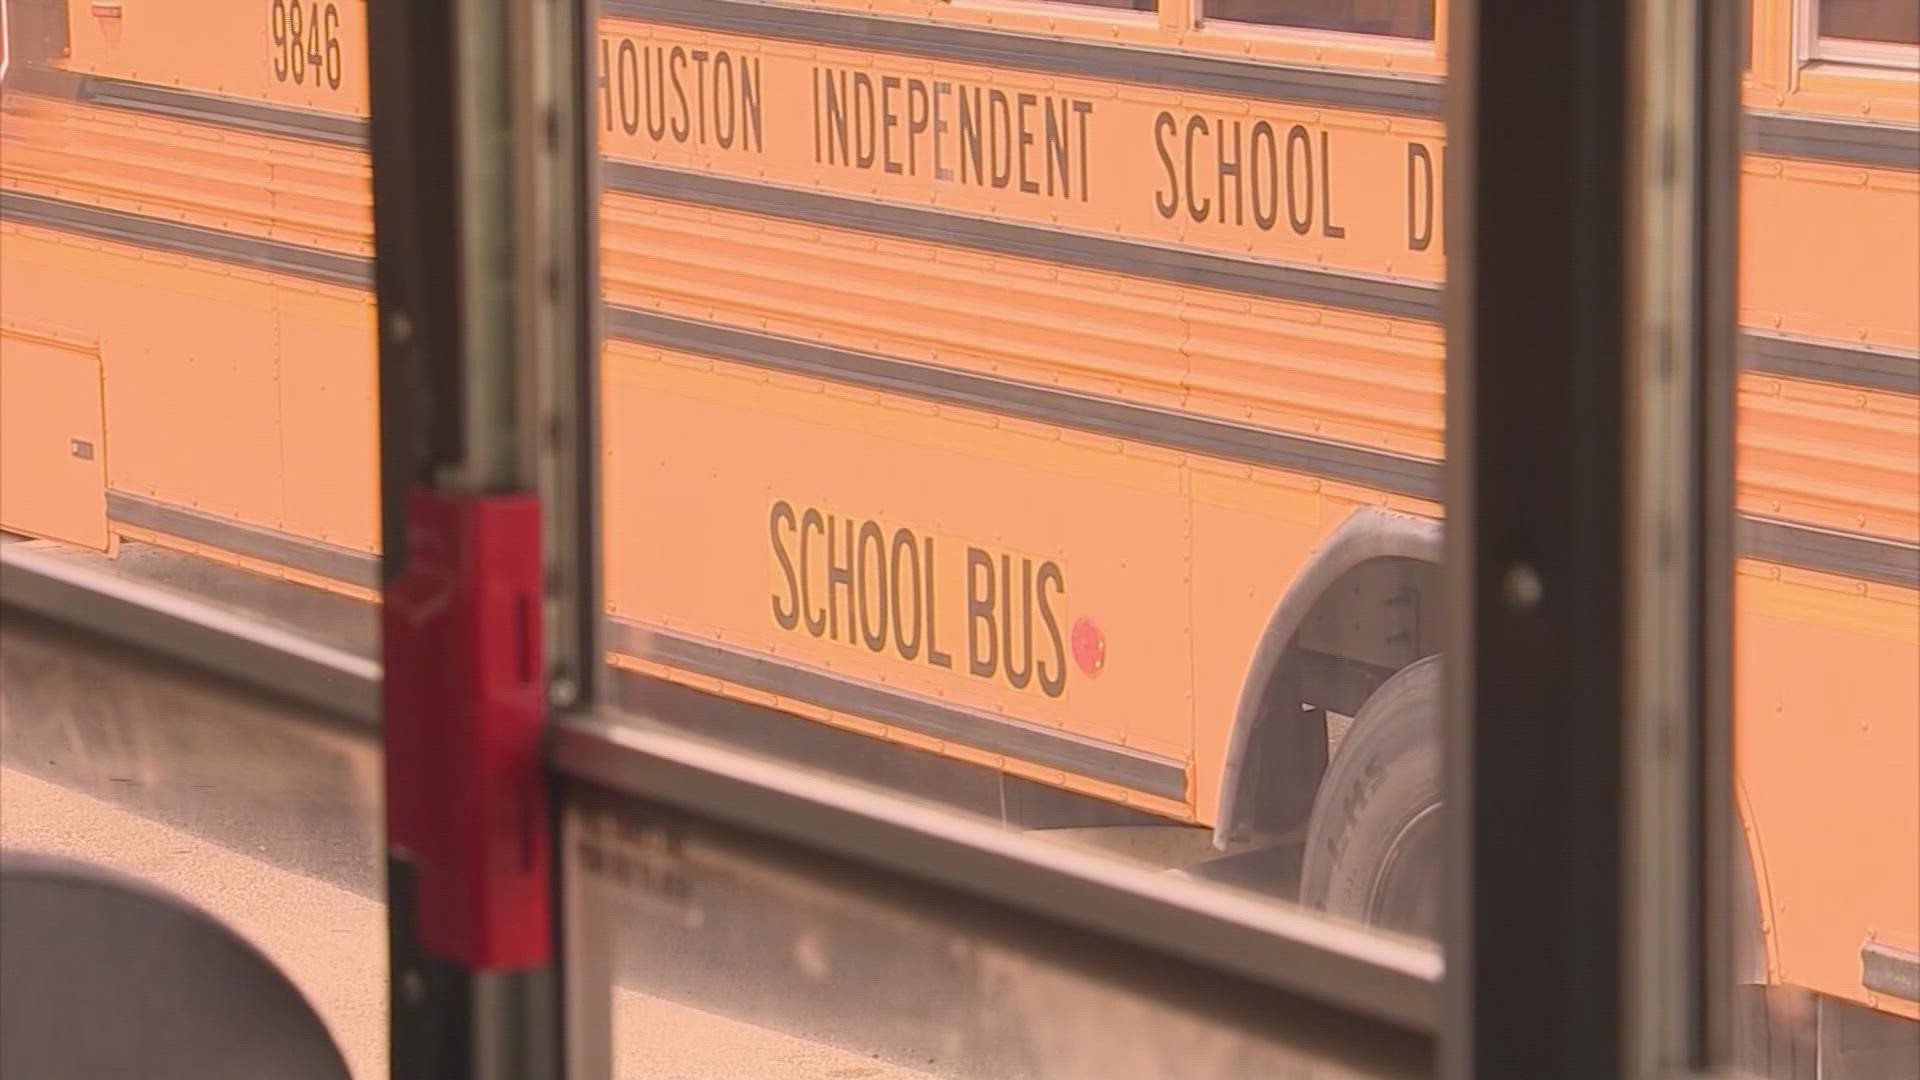 Many parents spent the weekend getting ready for the start of school, but some are concerned about the readiness of the district.